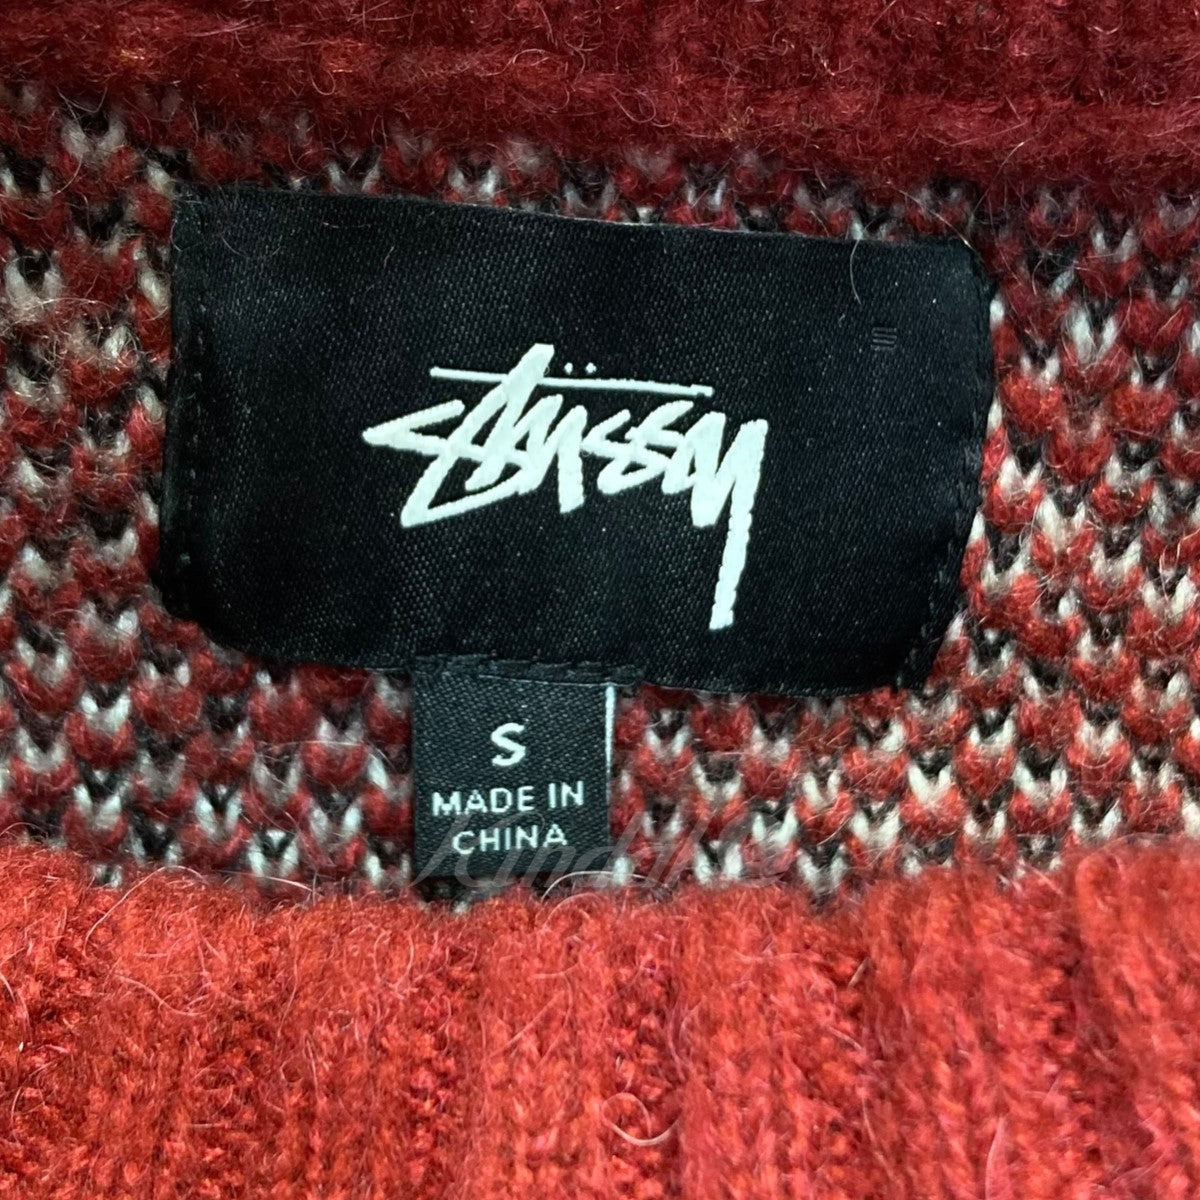 Stussy(ステューシー) 8 BALL HEAVY BRUSHED MOHAIR SWEATER　ニットセーター　94974